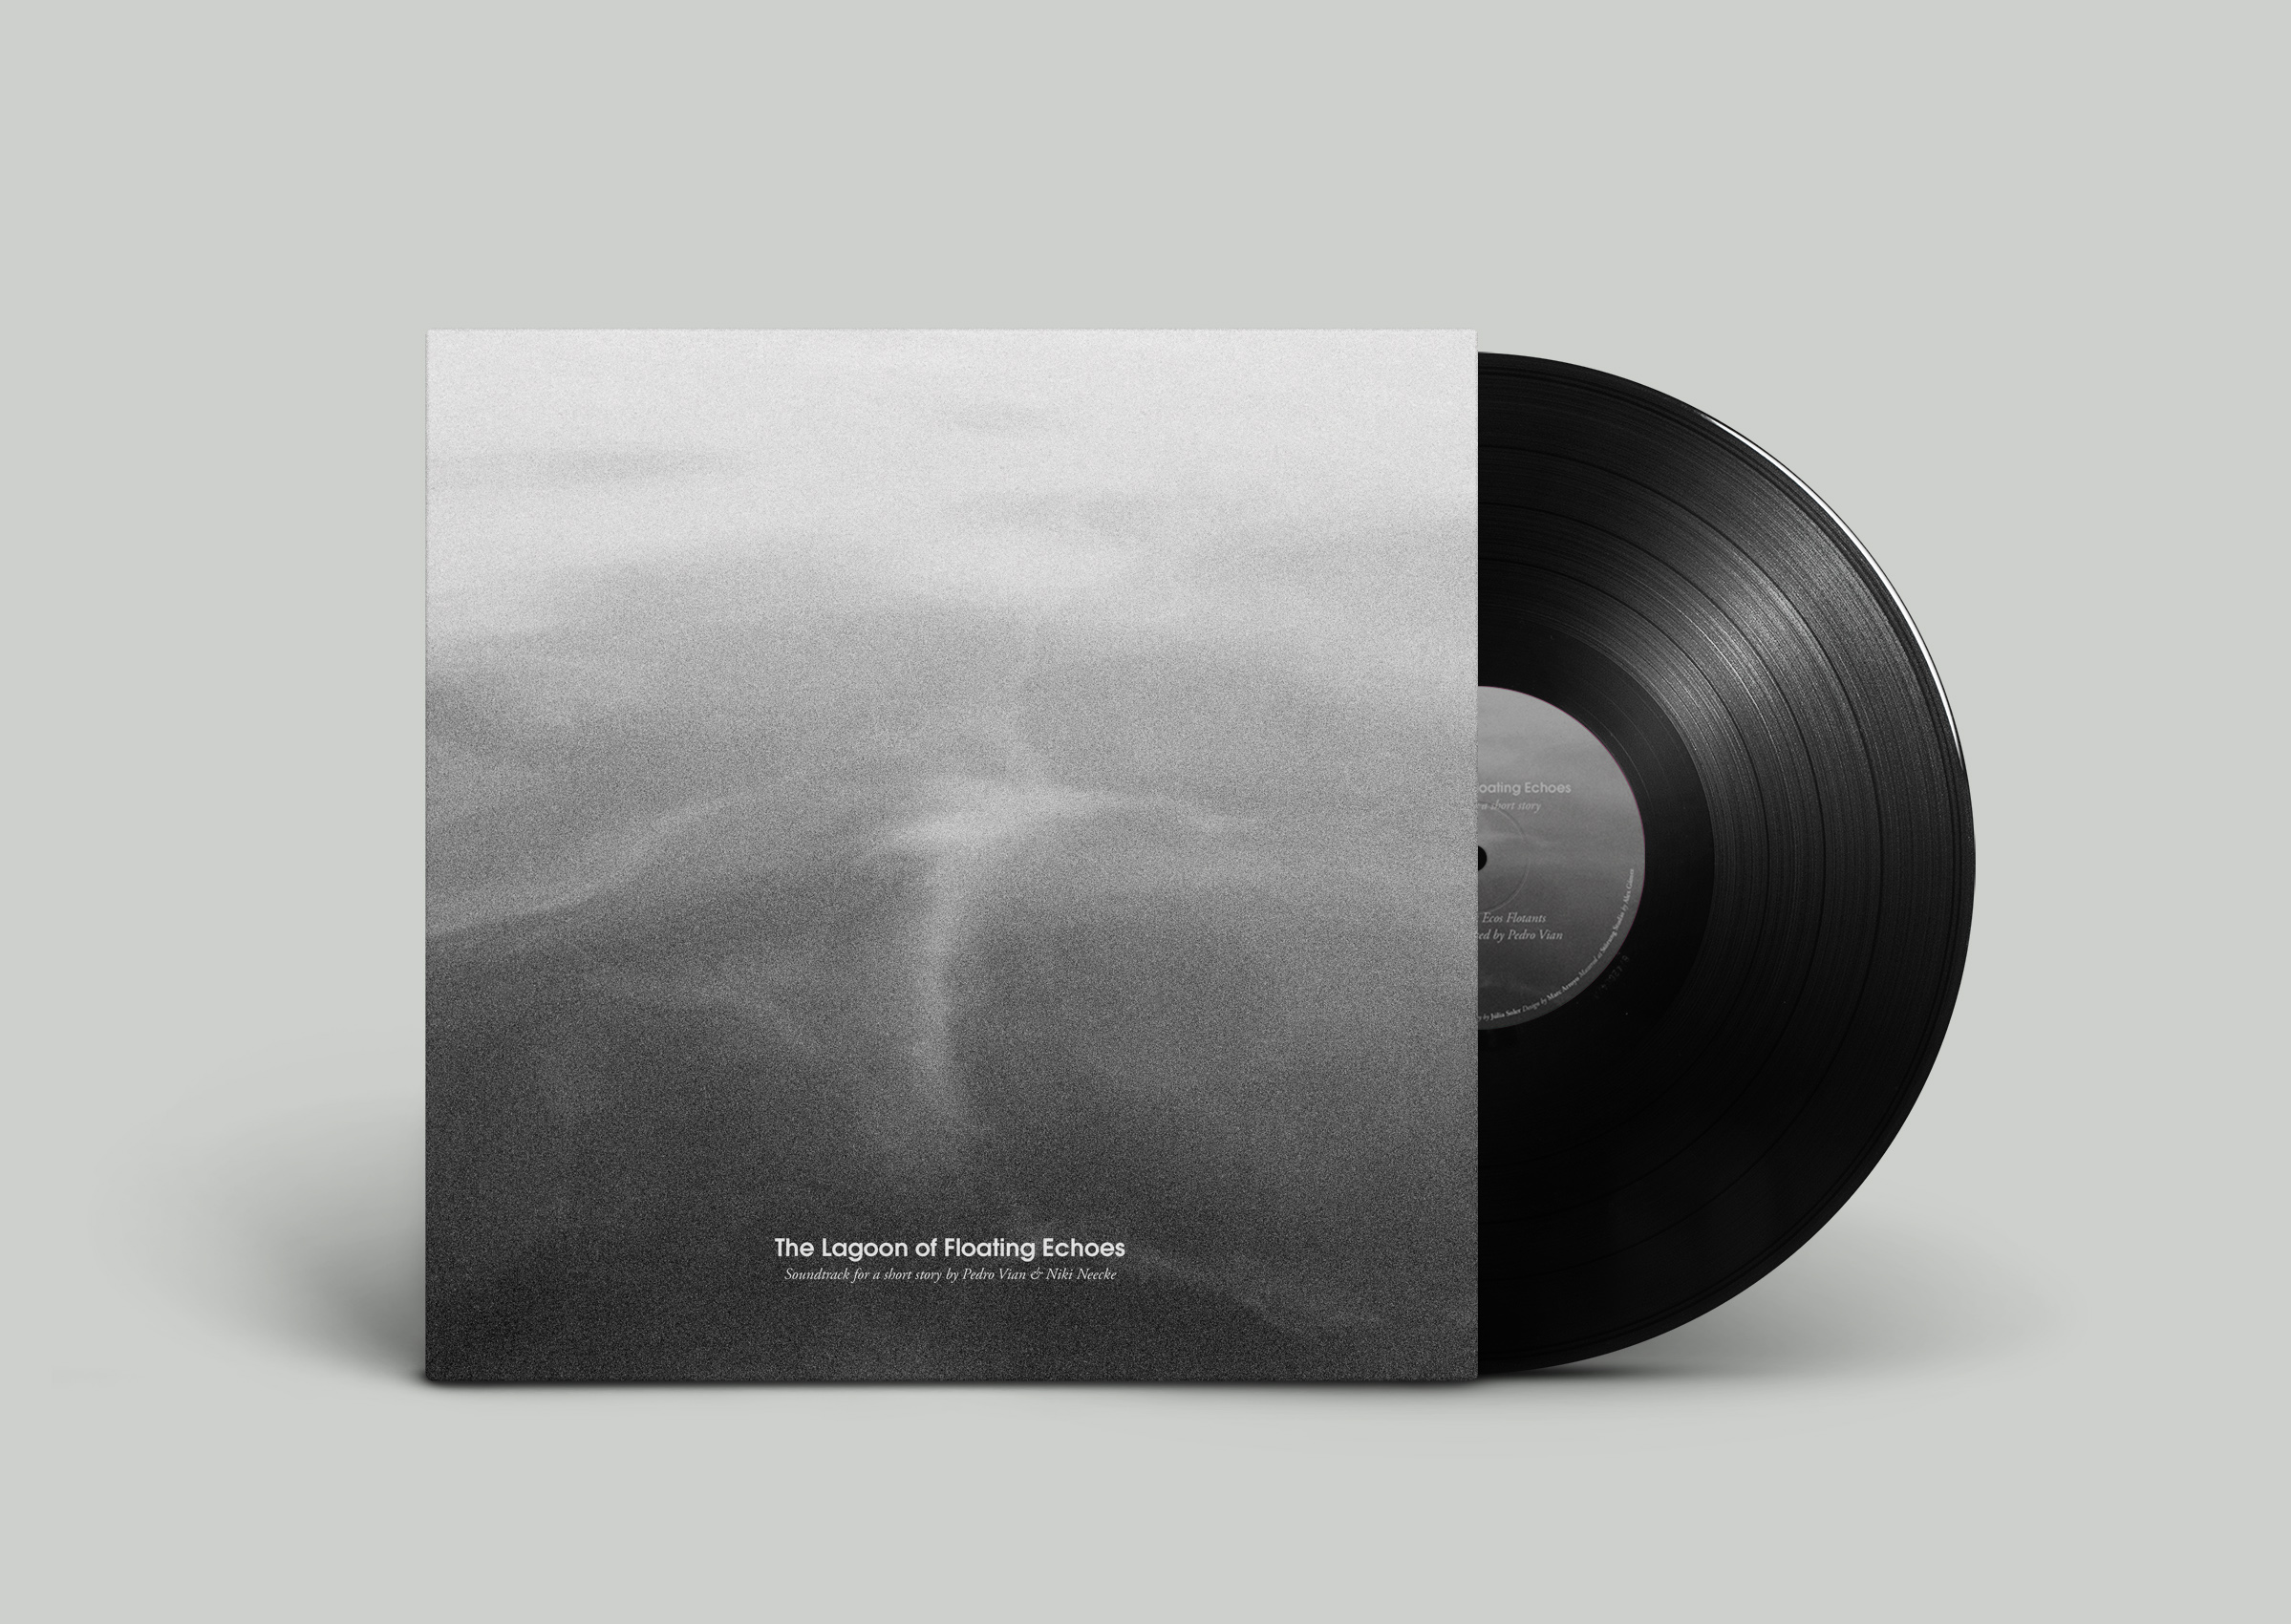 The Lagoon of Floating Echoes Vinyl  Soundtrack for a short story by Pedro Vian & Niki Neecke Doble Sol 01 12″